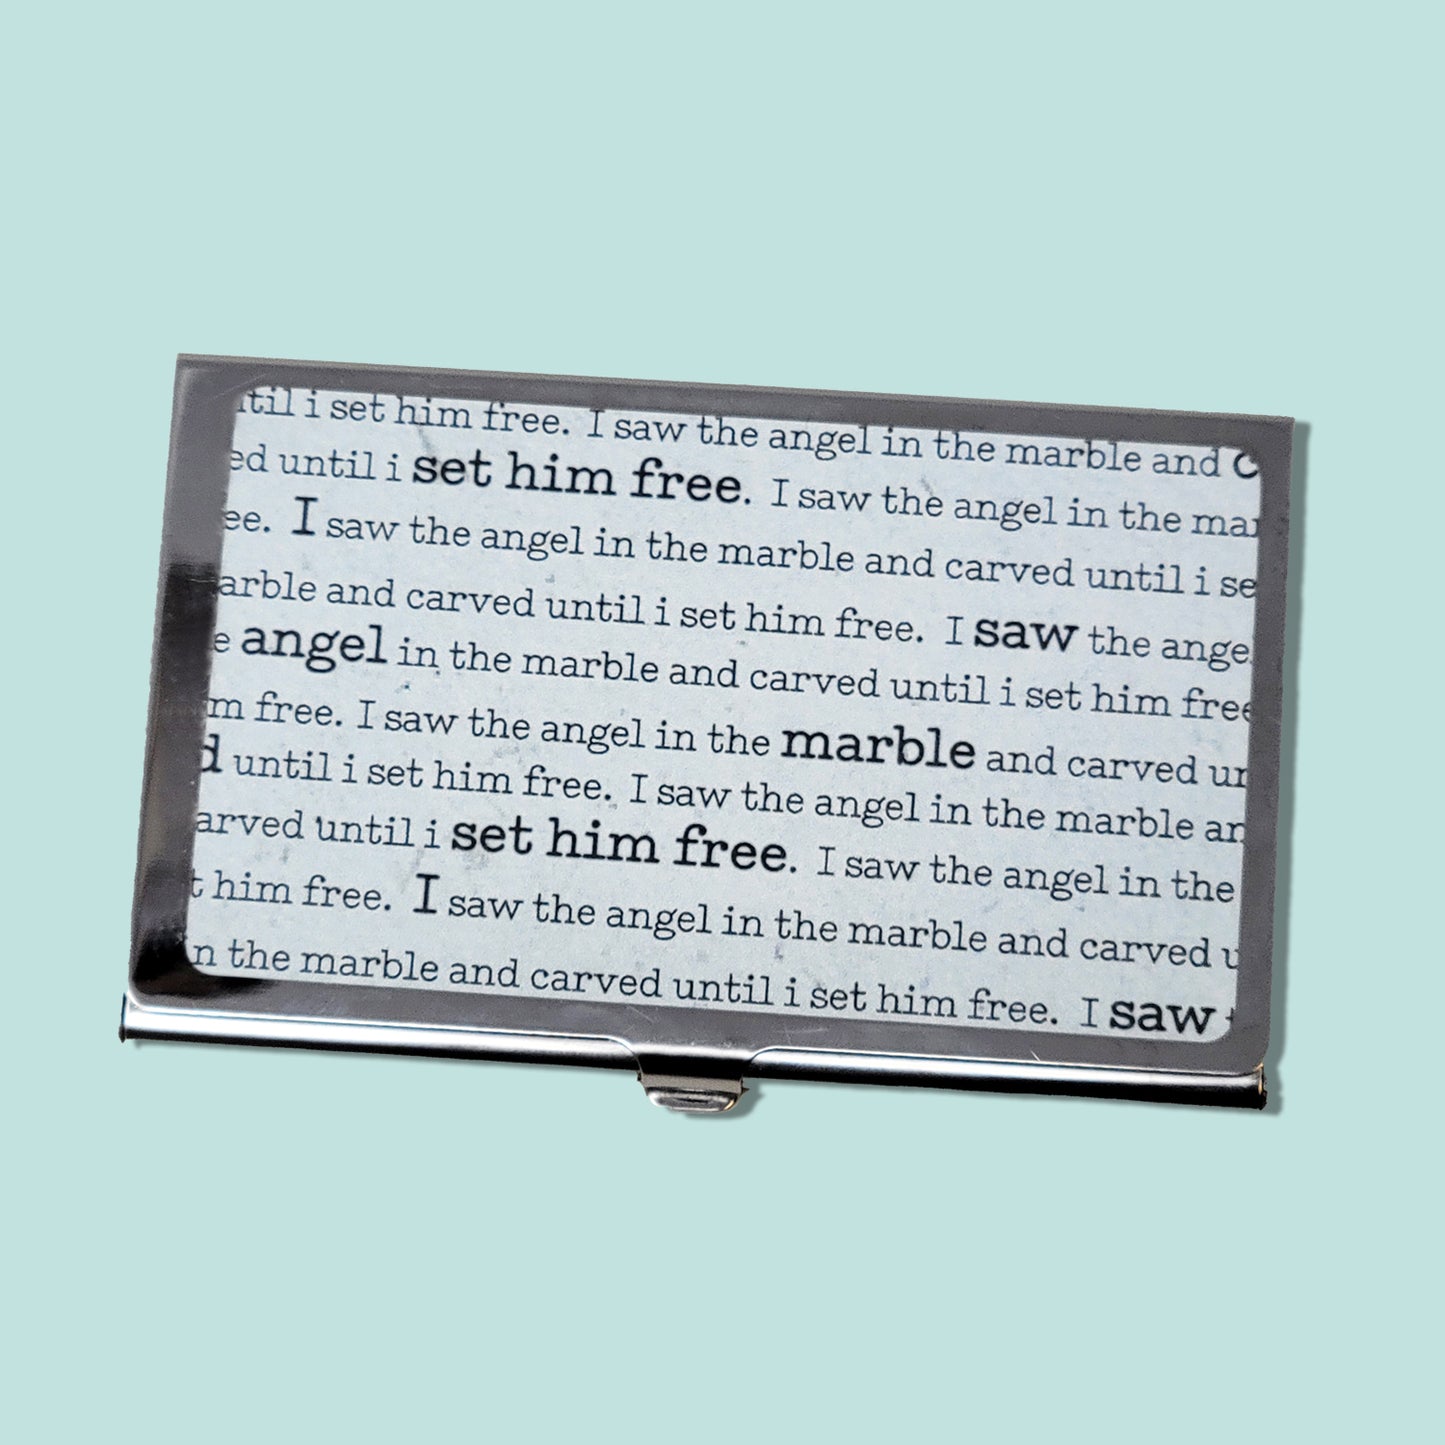 Metal Business Card Case | Michelangelo Quote “I saw the angel in the marble and carved until I set him free.” illustration